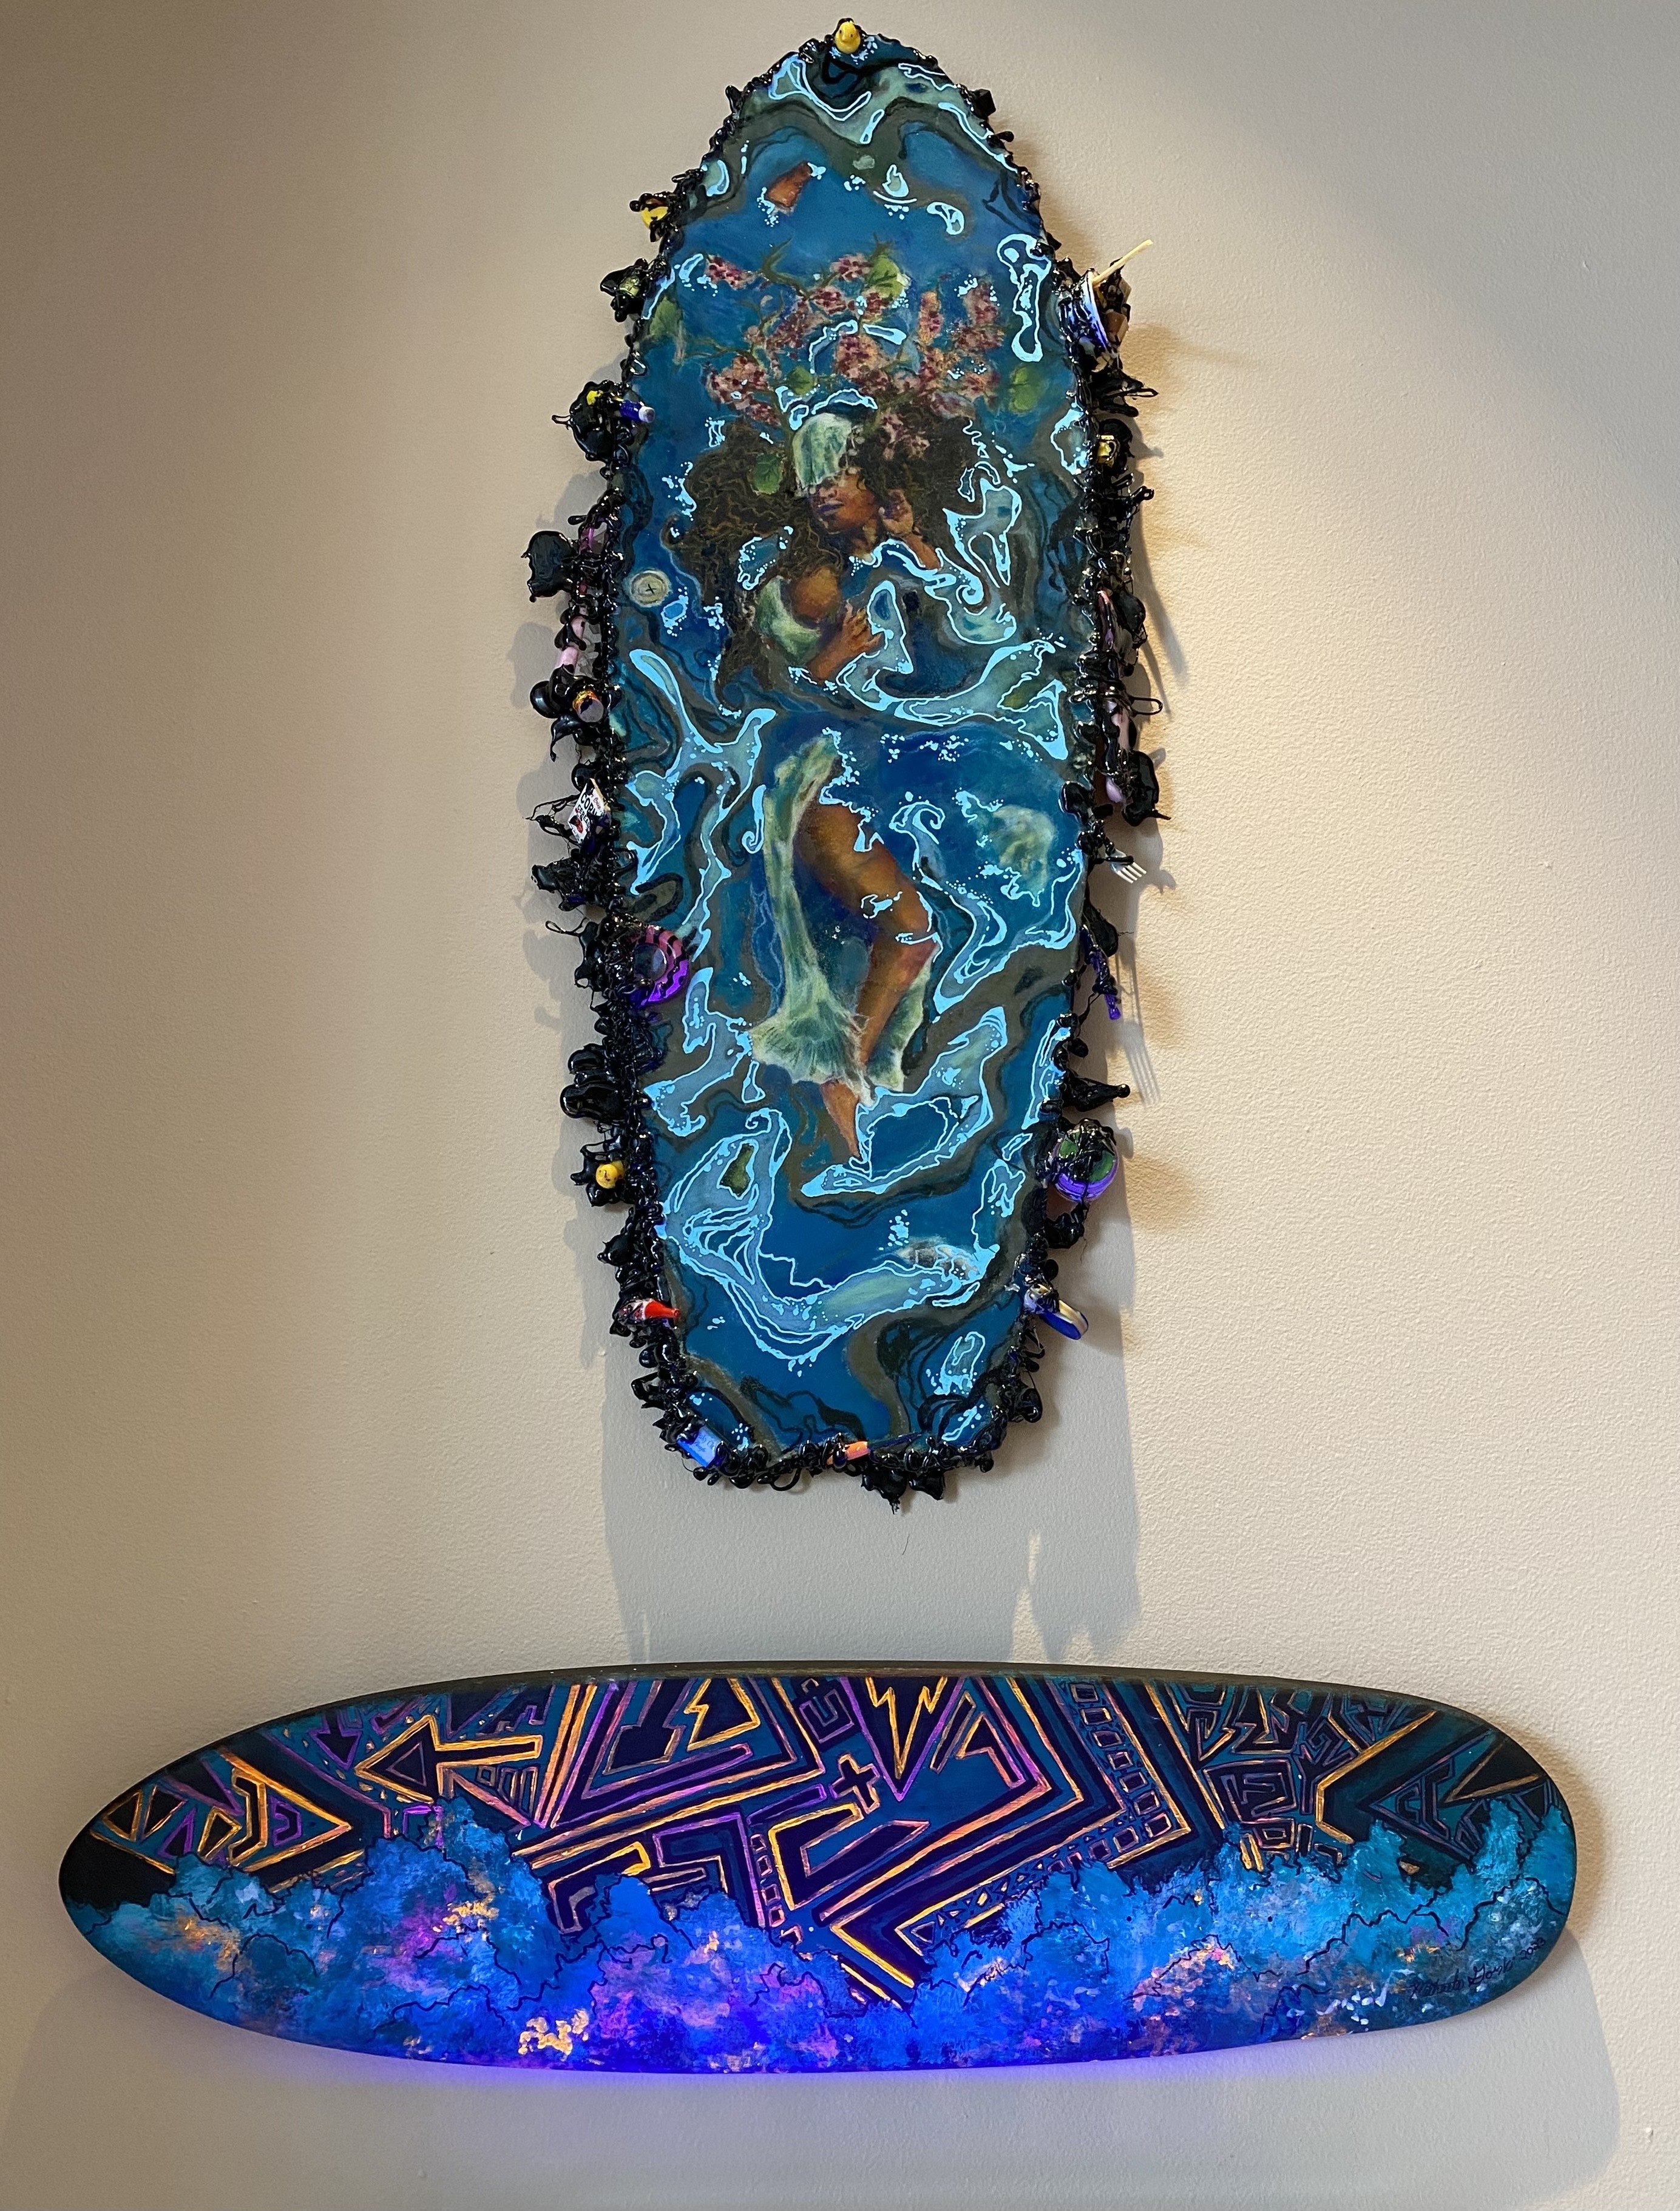 (Above) Tamhja Elizabeth Coe, "Being Submerged," 2023, Mixed media: pastels, wood resin, marker; (Below) Michaela Gorski, "A Skateboarder's Guide to the Galaxy," 2023, Acrylic paint on wood